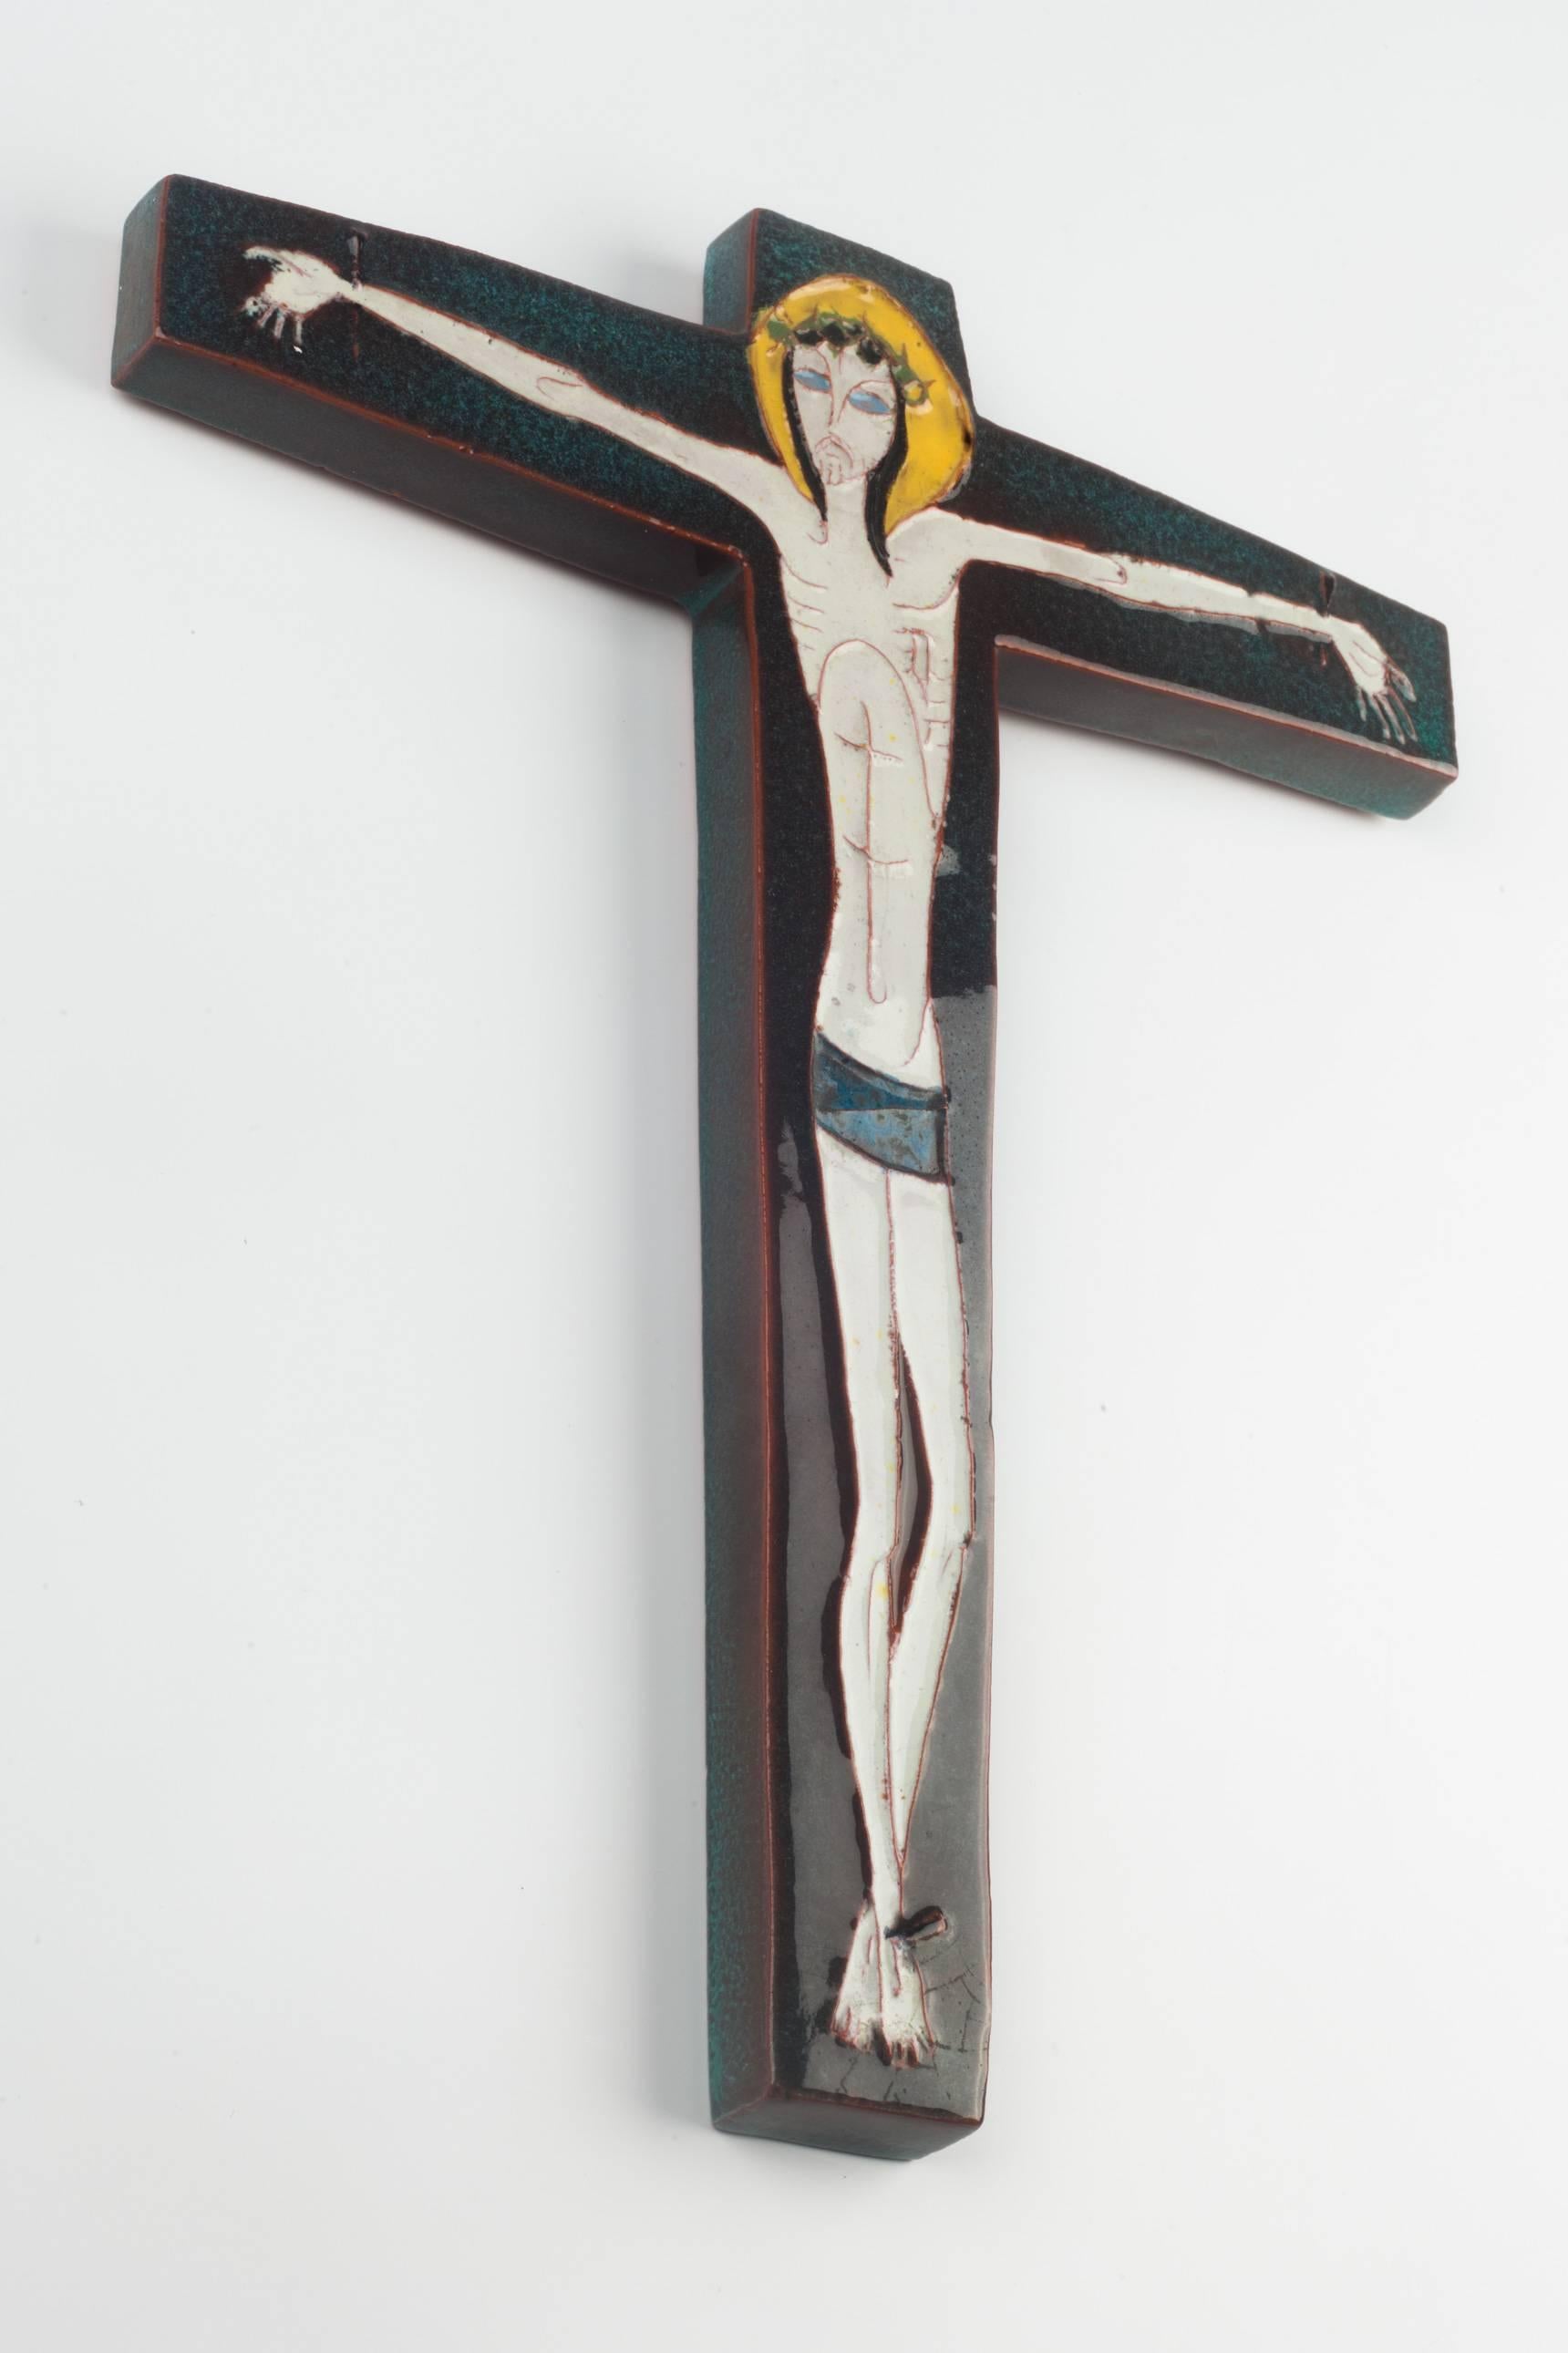 Eleven inch tall wall crucifix in ceramic, made in Belgium in the 1950s.
Deep blue green, light beige and yellow. Christ figure drawn in very delicate lines.

This piece is part of a 69 piece ceramic crucifix collection, all made in Belgium between